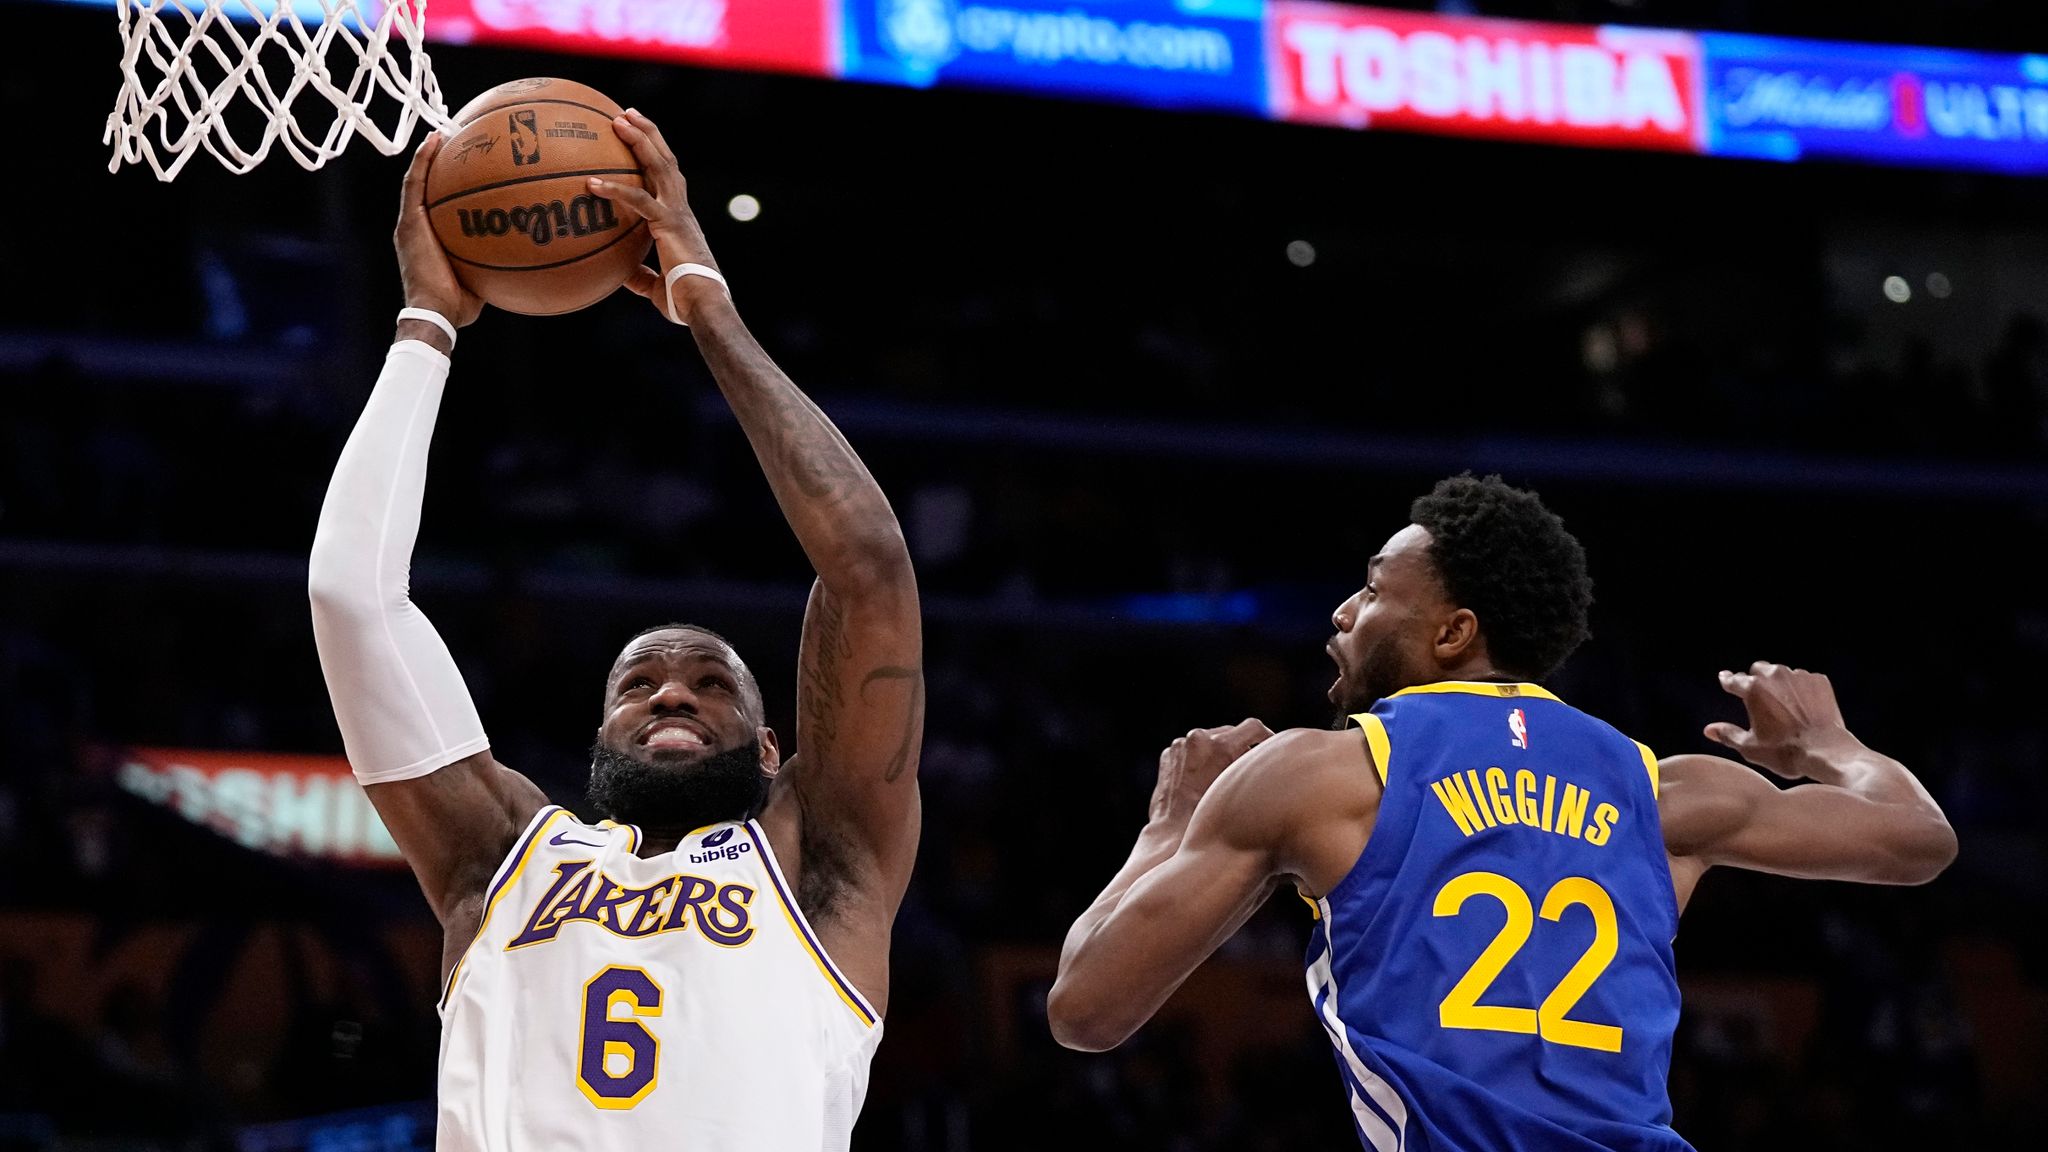 NBA Conference semi-finals LeBron James Los Angeles Lakers rout Golden State Warriors 127-97 and take 2-1 series lead NBA News Sky Sports